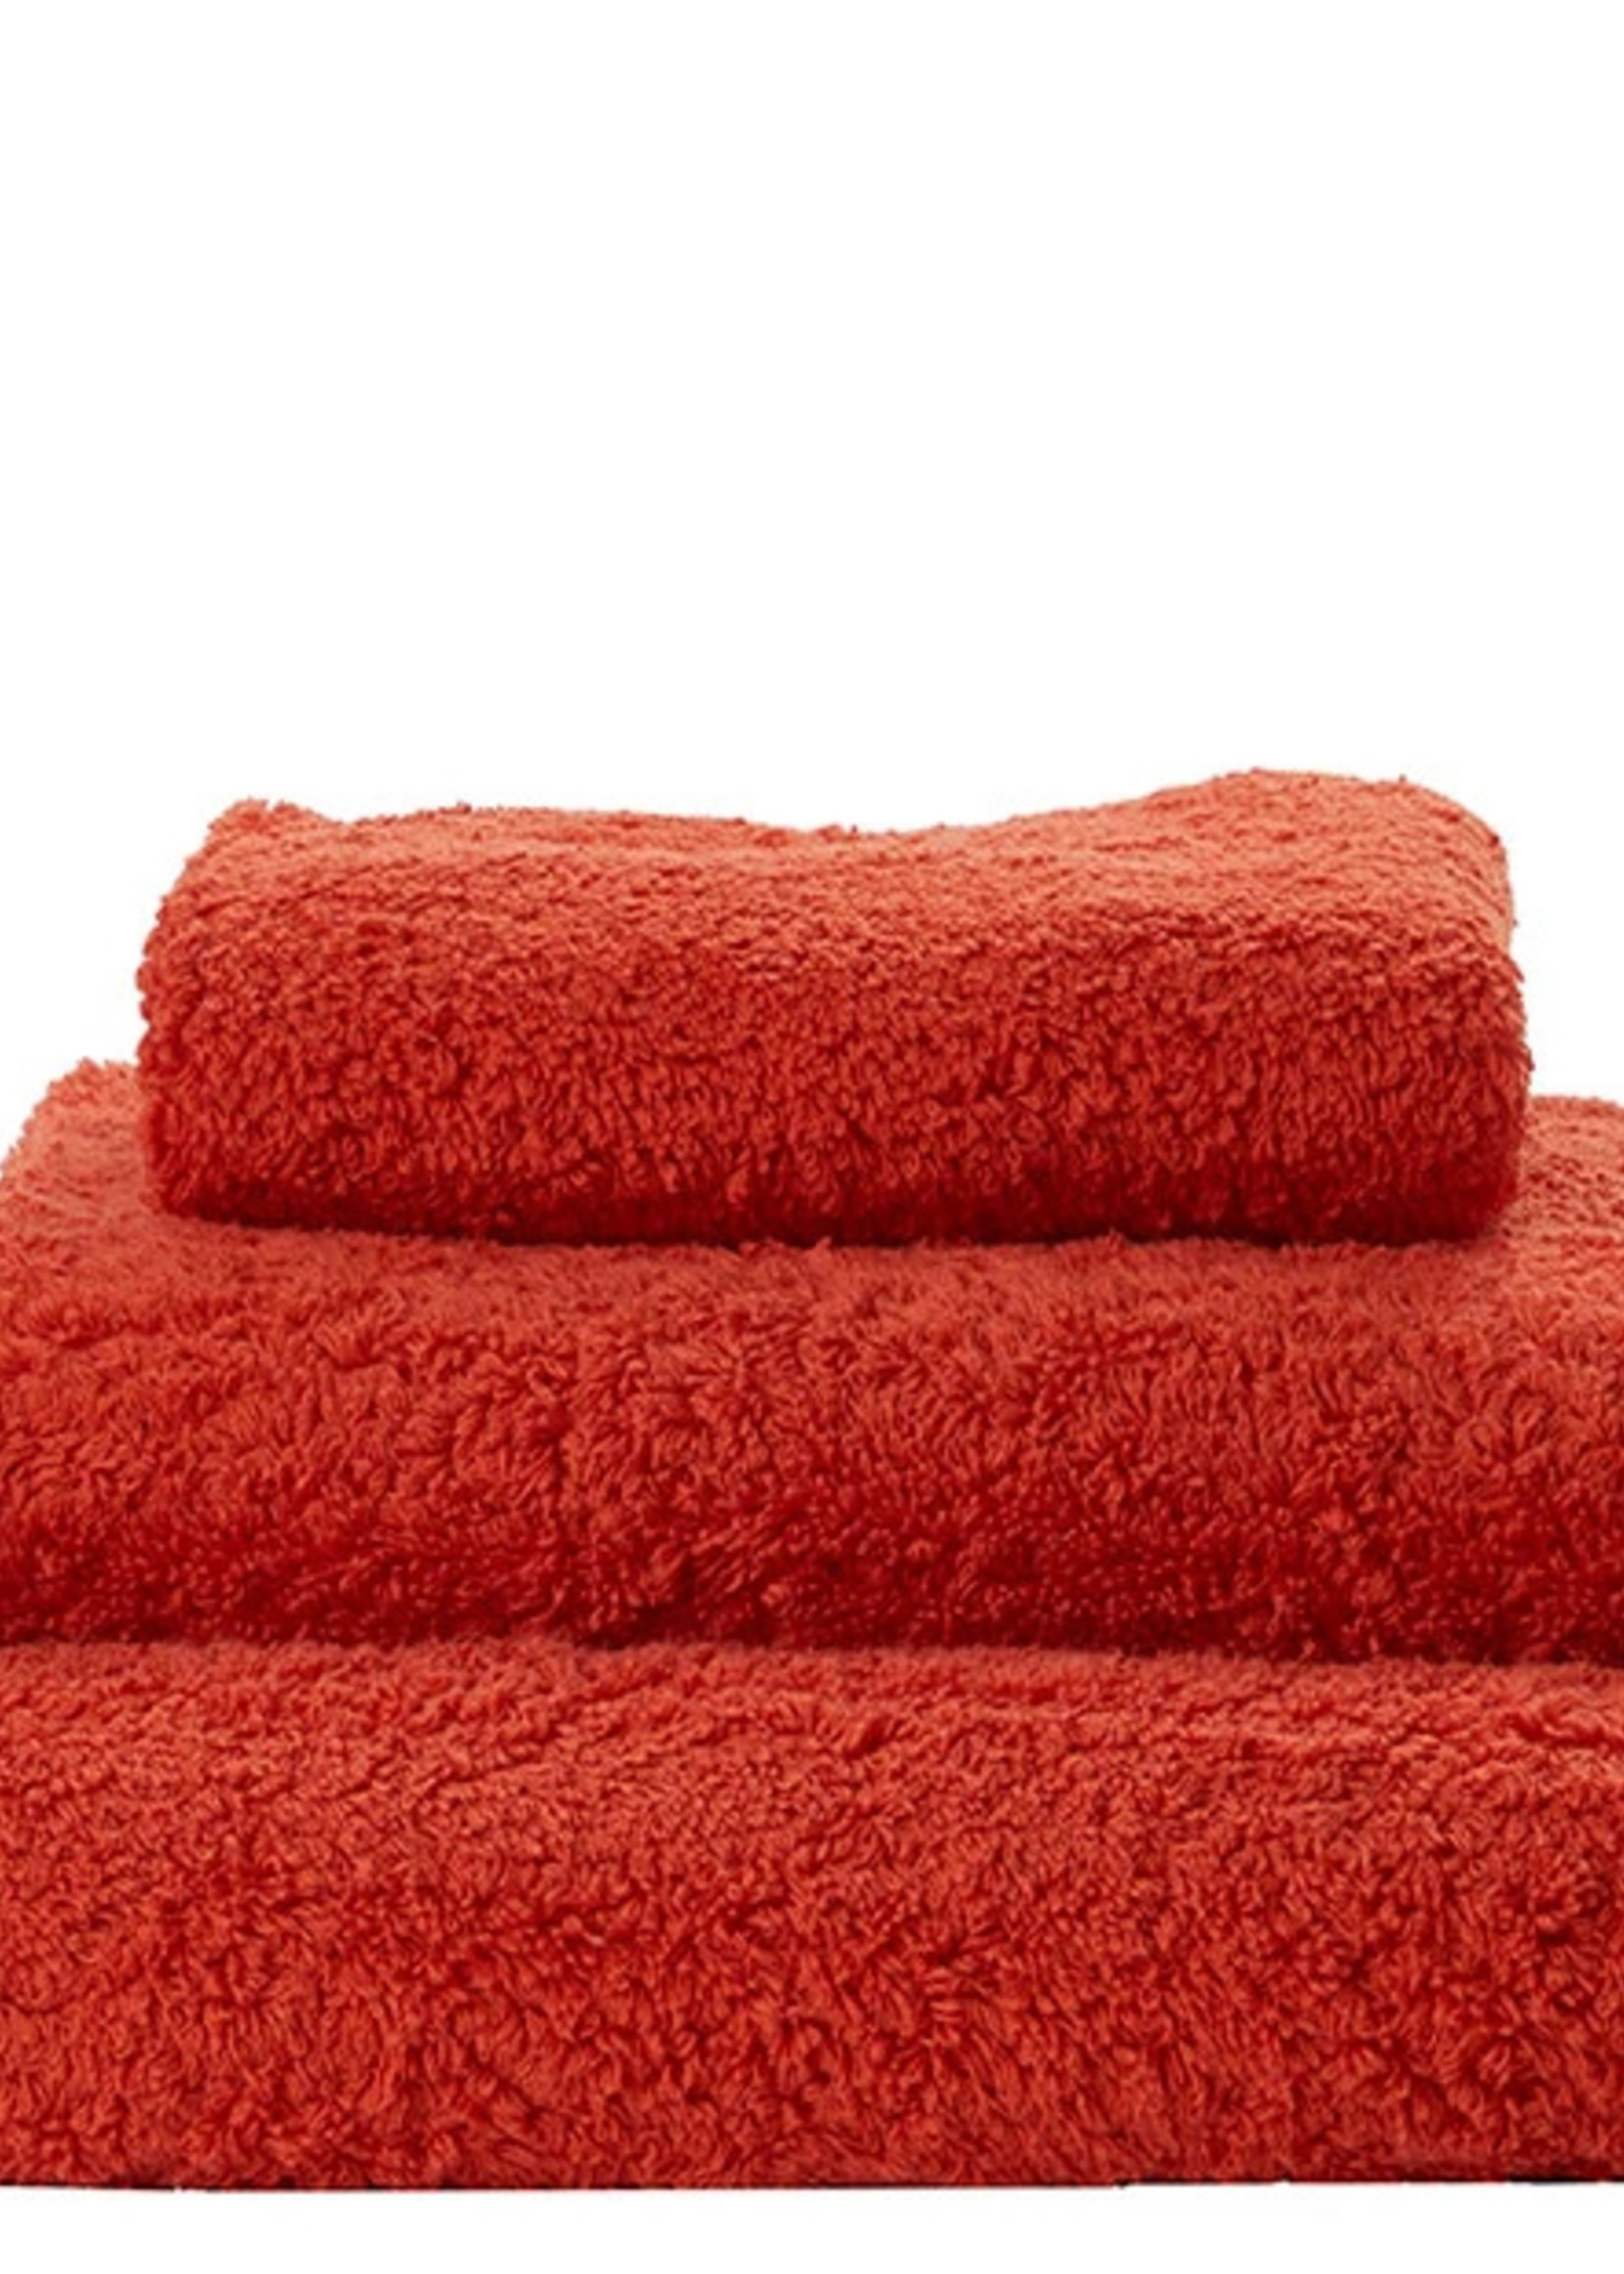 Abyss & Habidecor Super Pile Spicy Towels